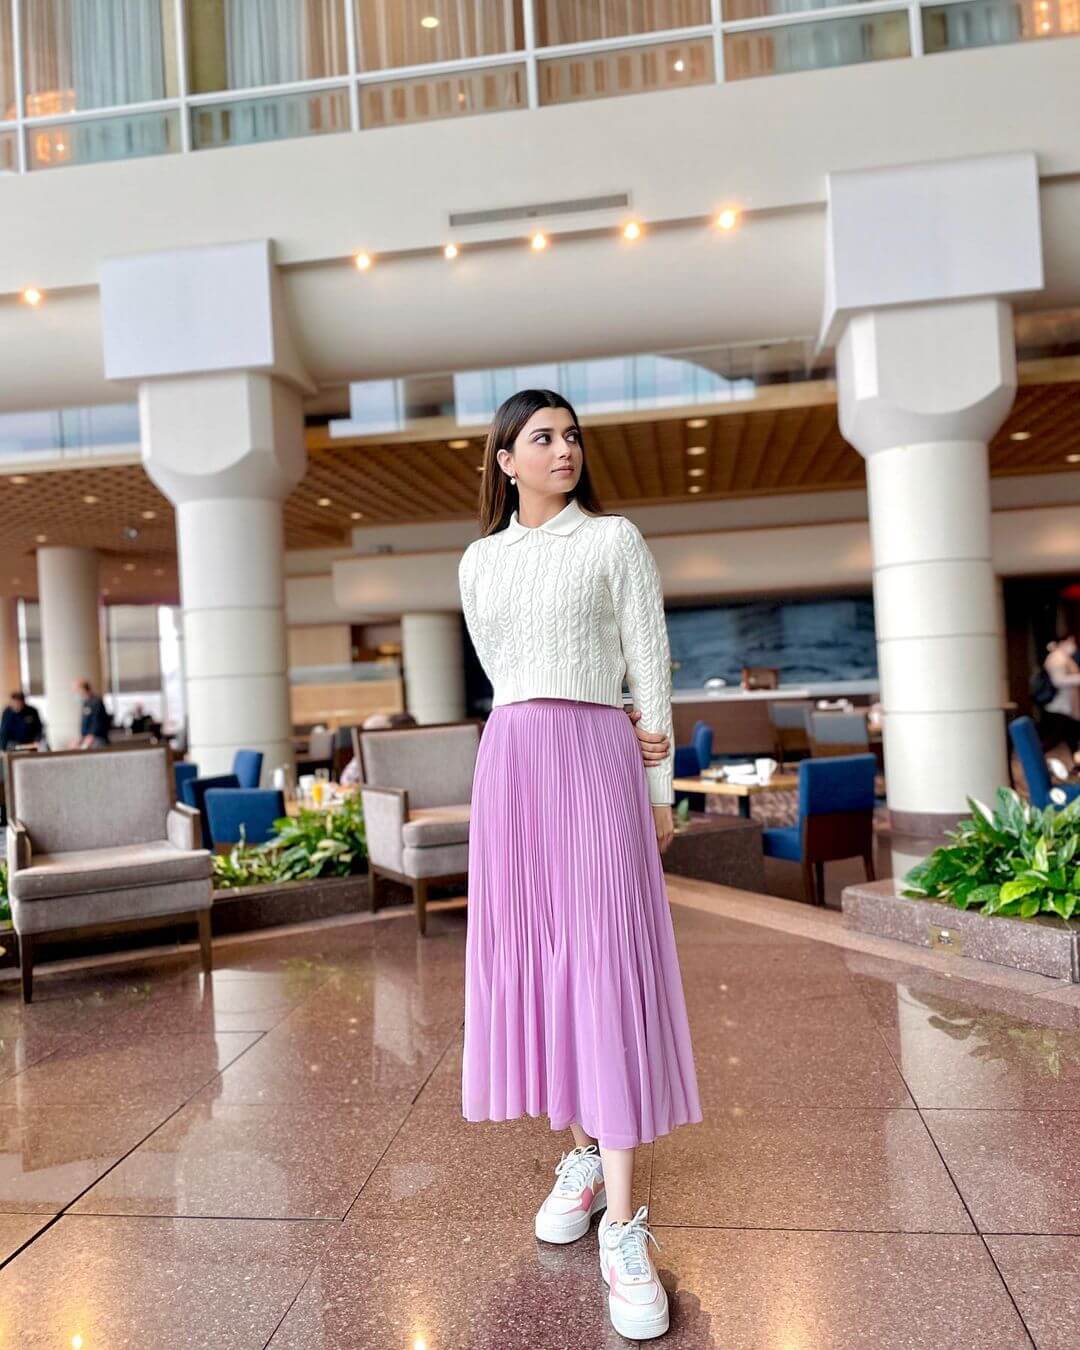 Nimrat Khaira Attractive Look In White Pullover With Purple Skirt Outfit